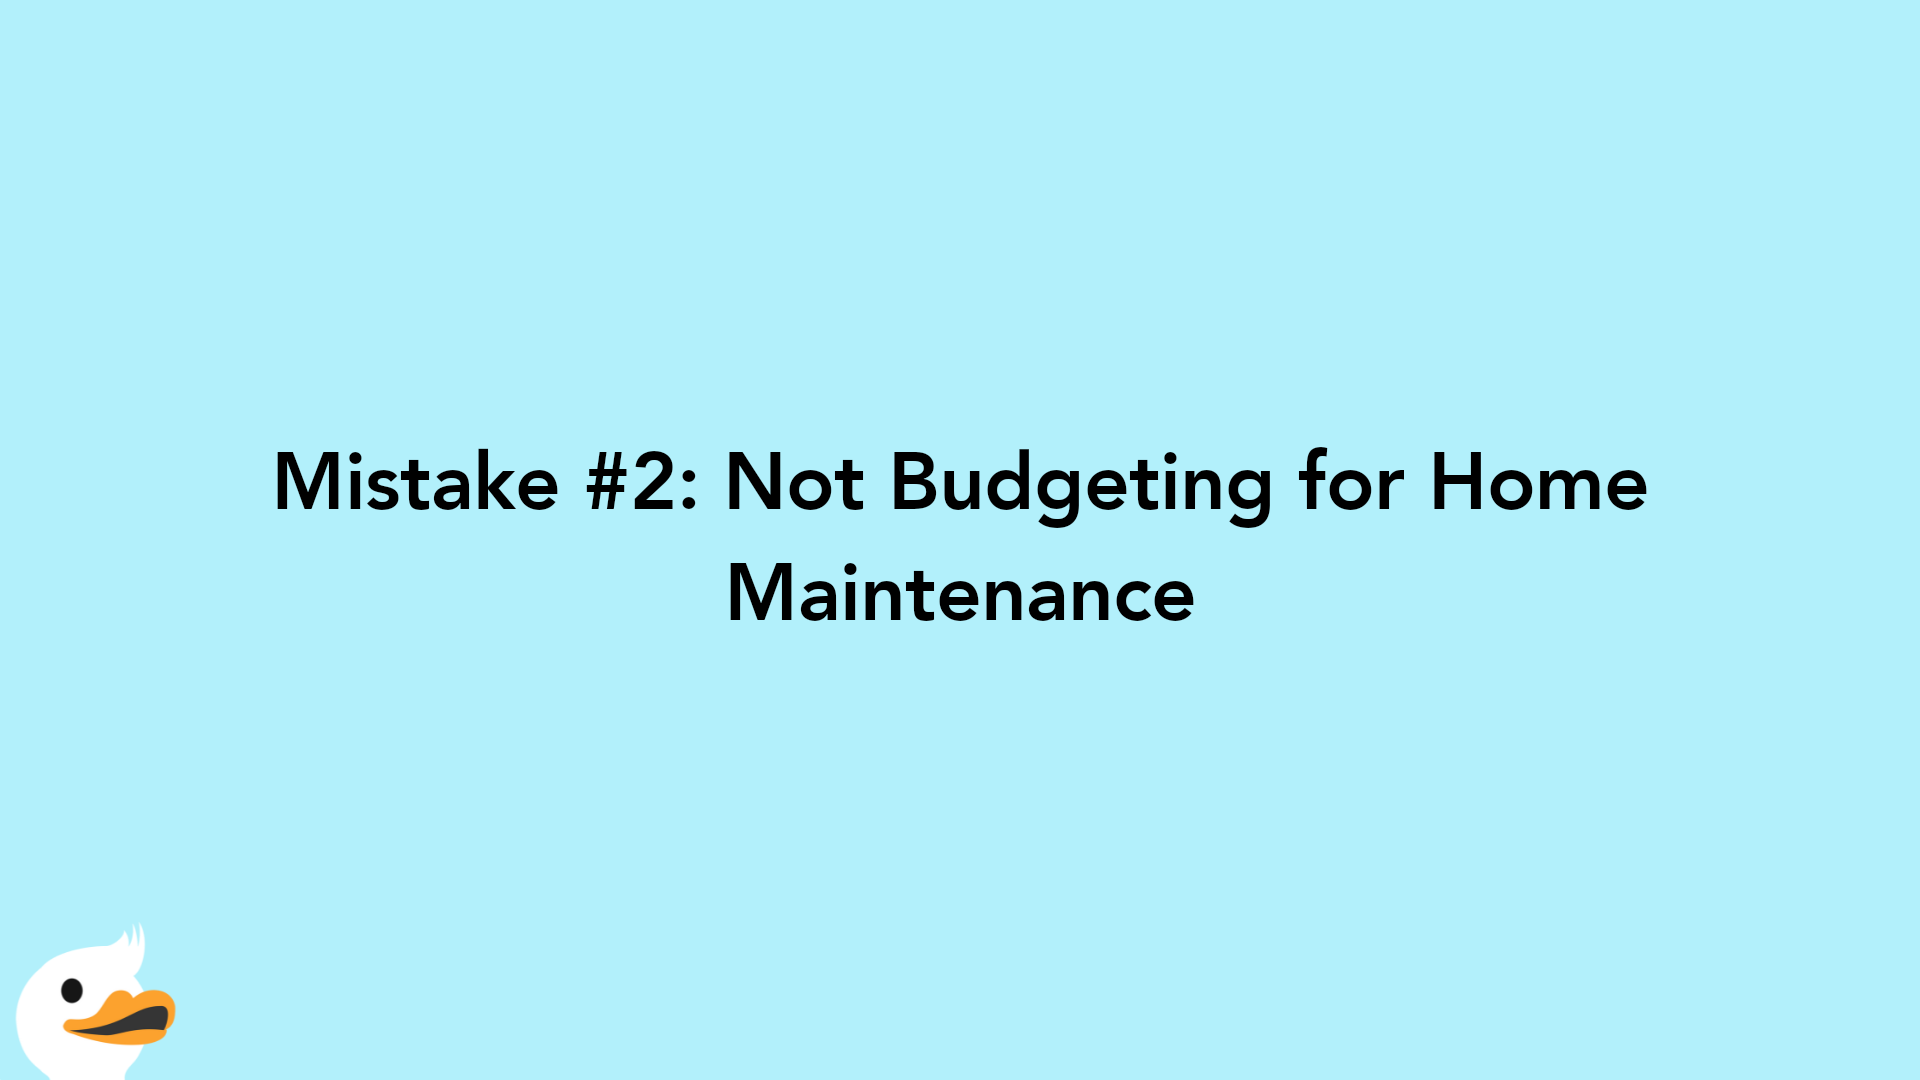 Mistake #2: Not Budgeting for Home Maintenance